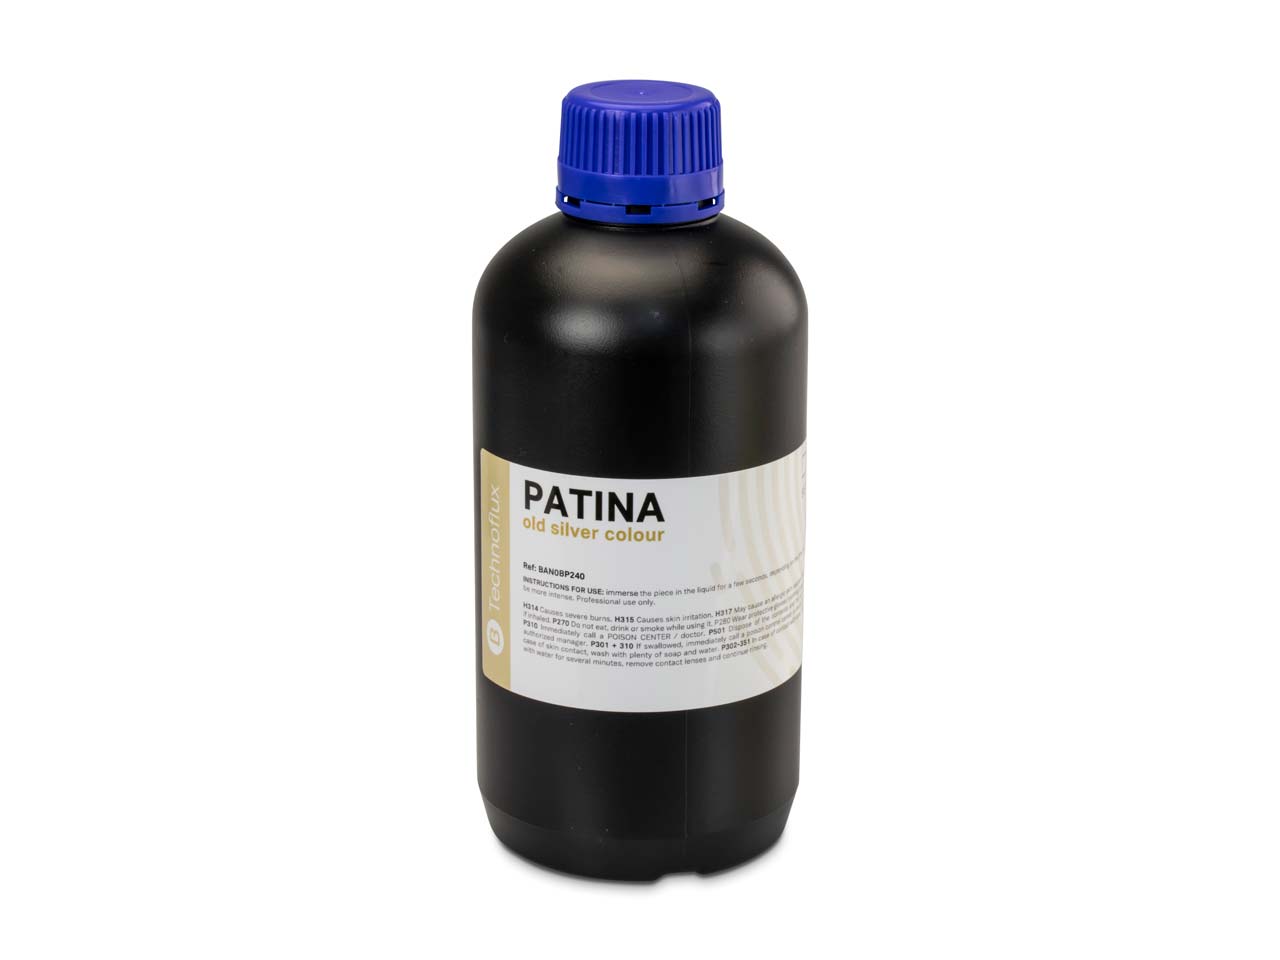 Patina Oxidising Solution 1 Litre UN2922 Questions & Answers